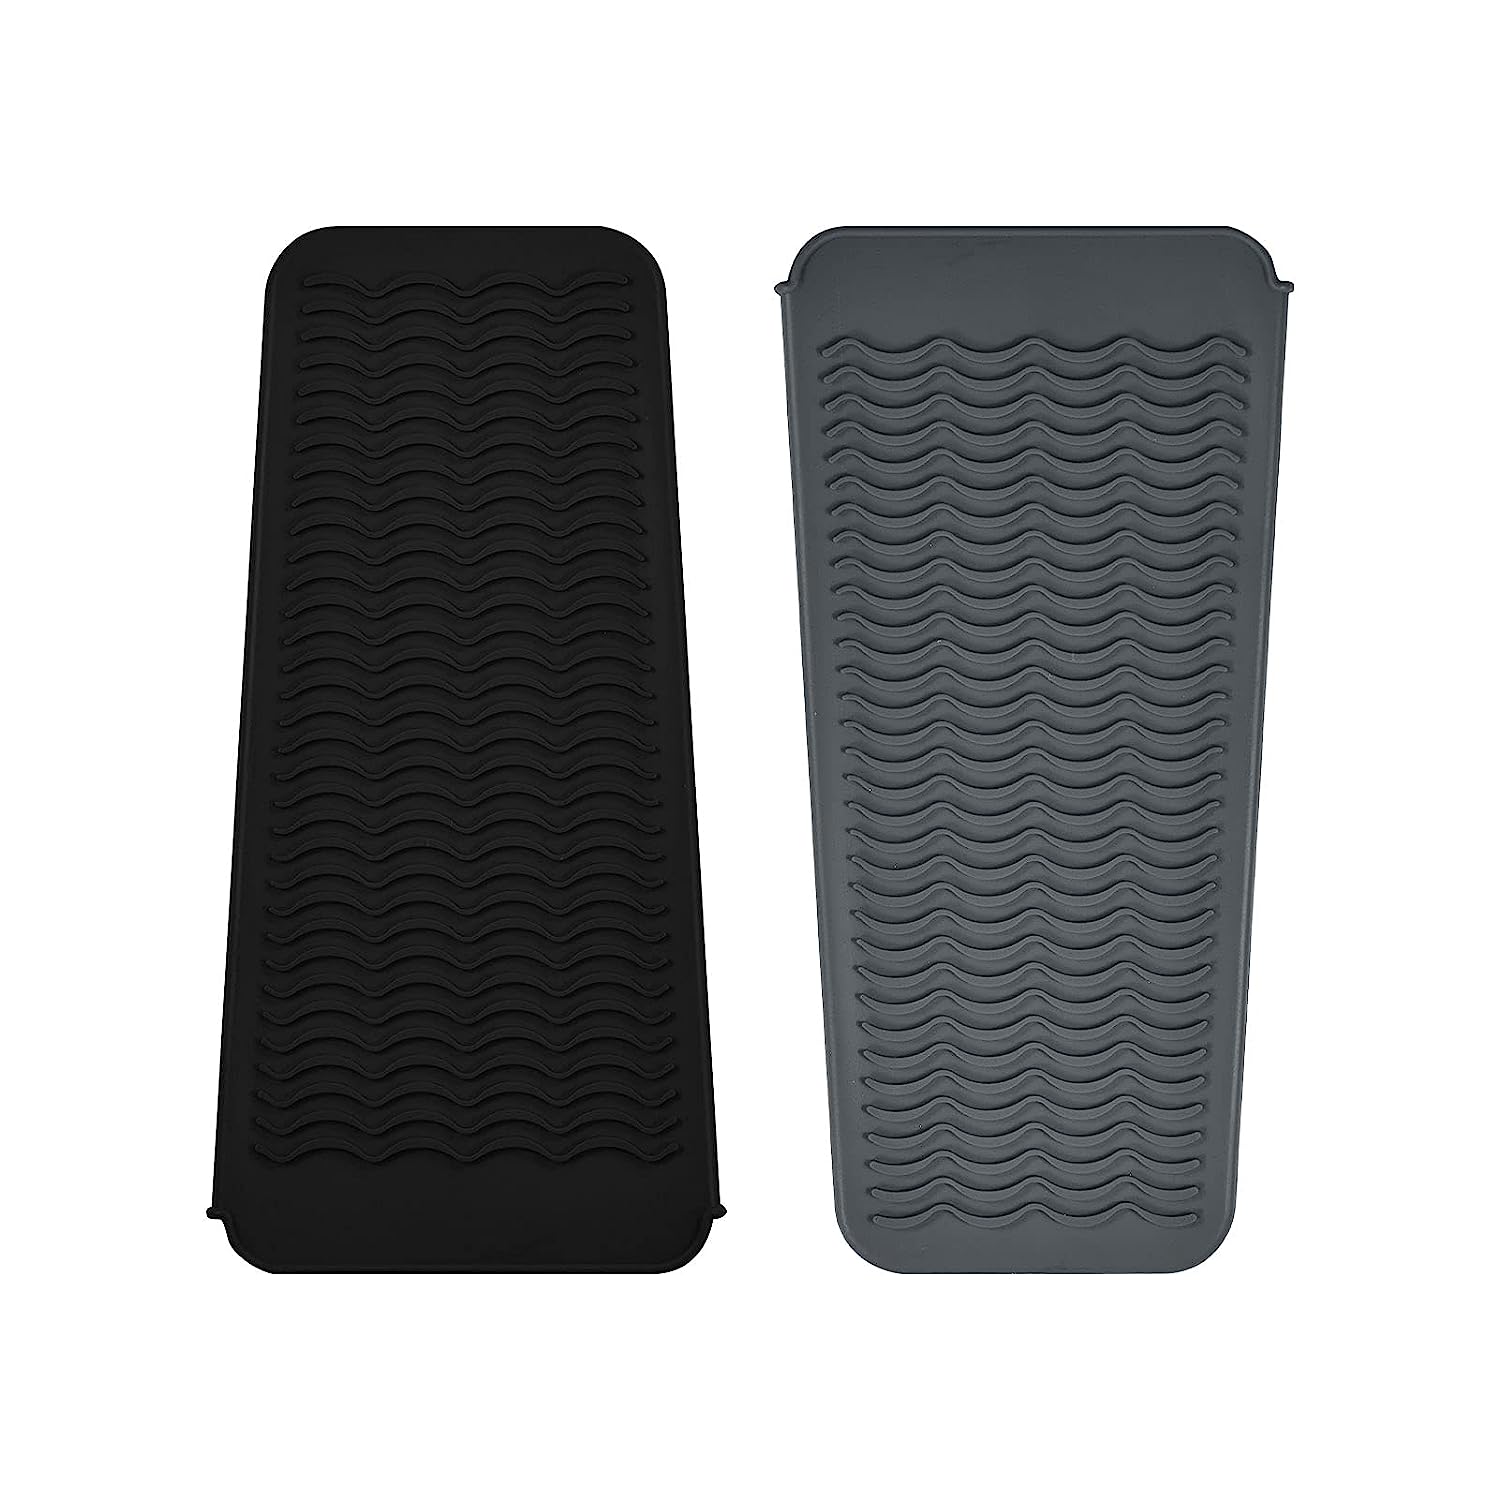 EIOKIT Silicone Heat Resistant Travel Mat Pouch for [...]